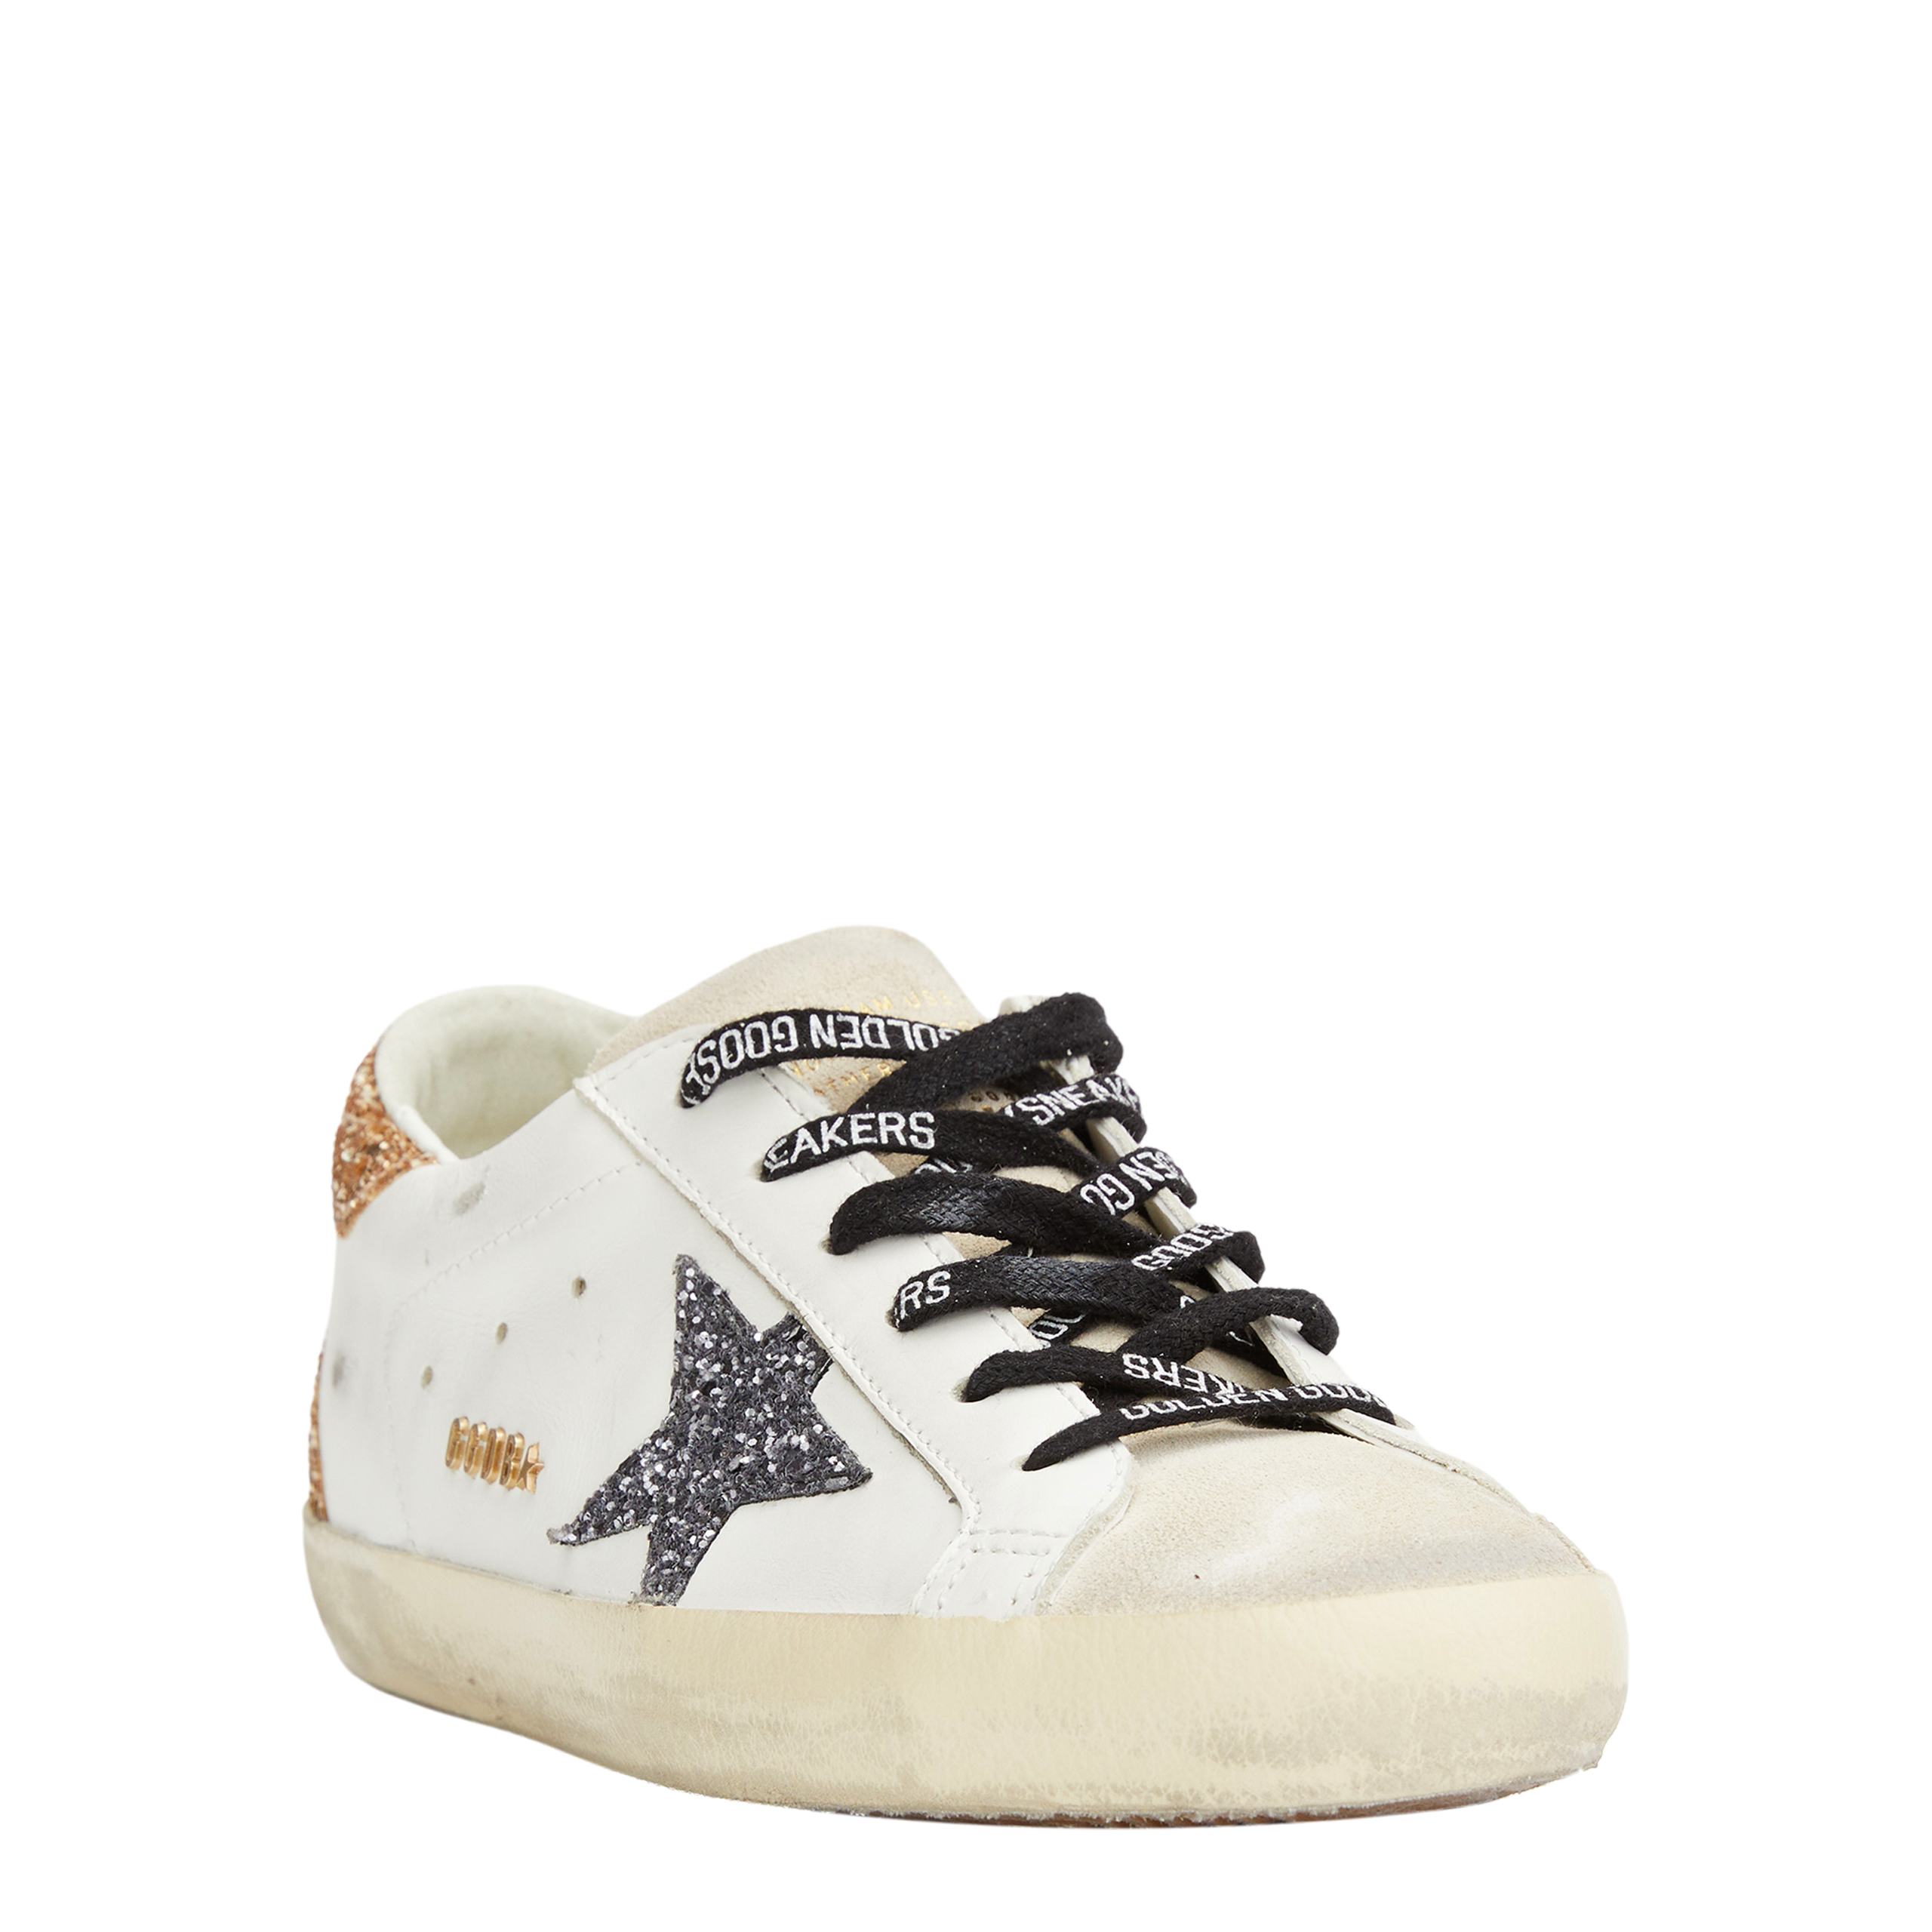 None Golden Goose Deluxe Brand GWF00102/F005358/82532, размер 36;41 GWF00102/F005358/82532 - фото 4